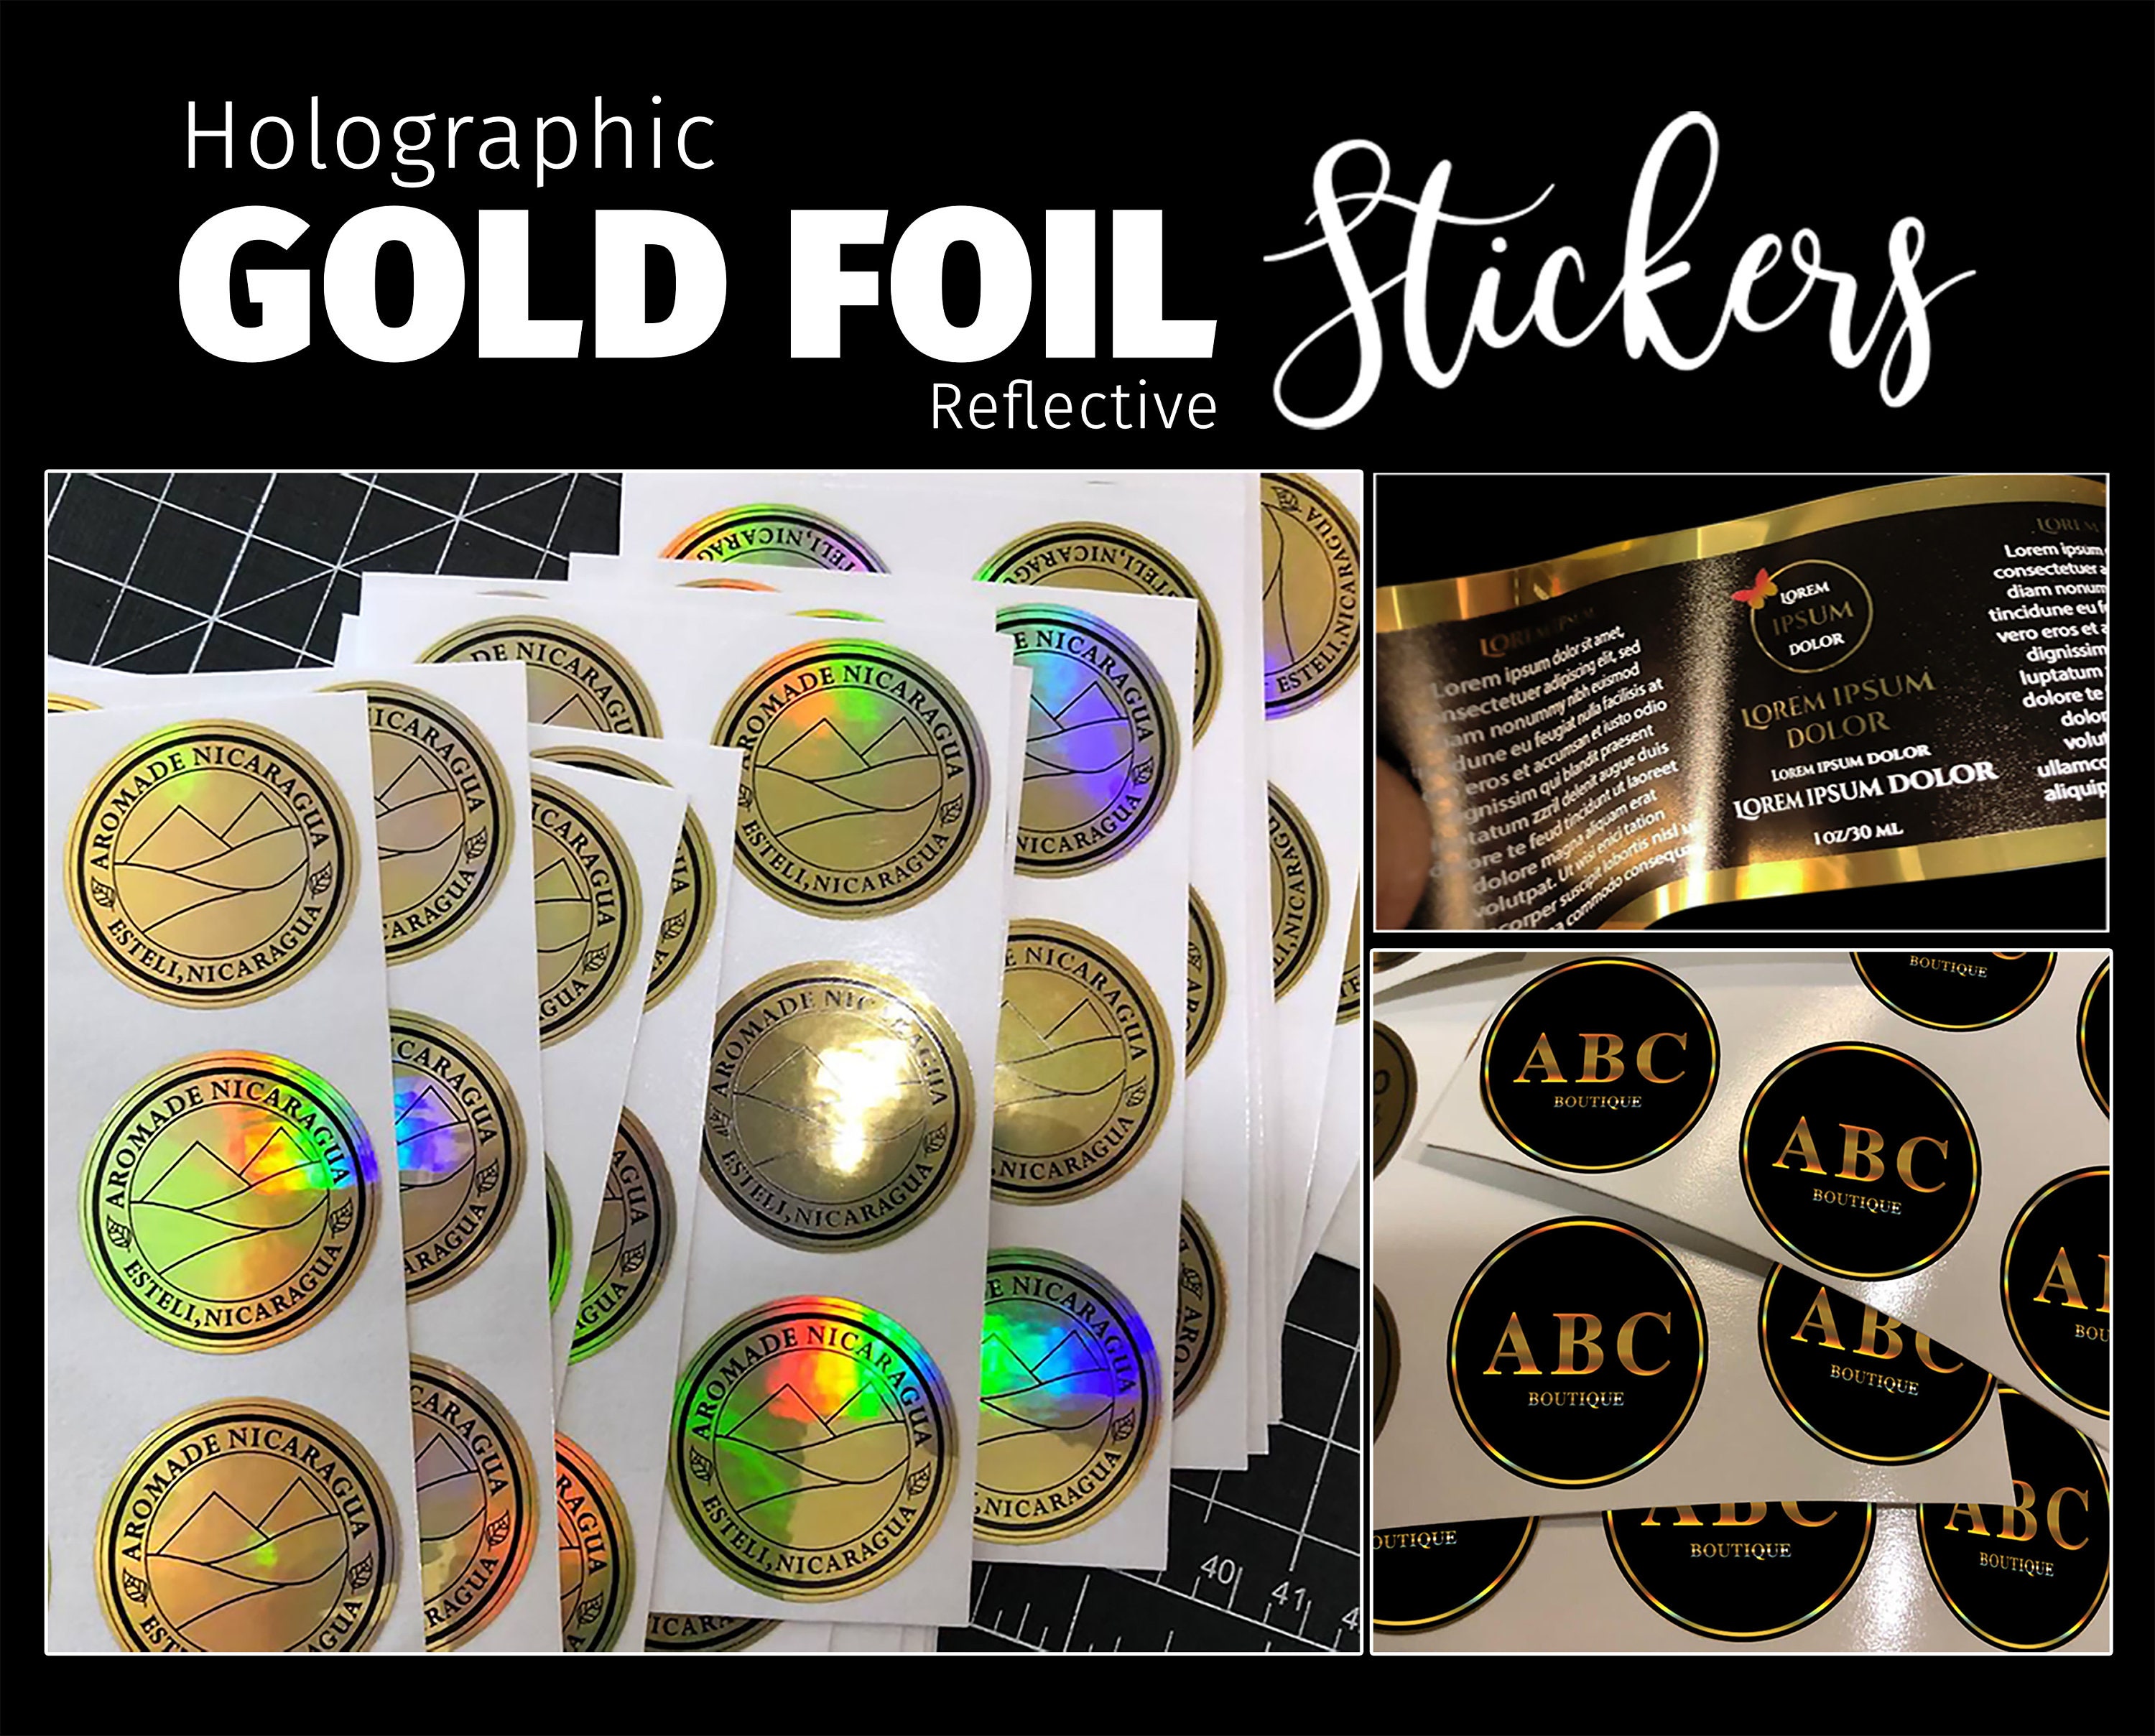 Gold Foil Custom Printed Stickers / Labels 1.5 x 1.5